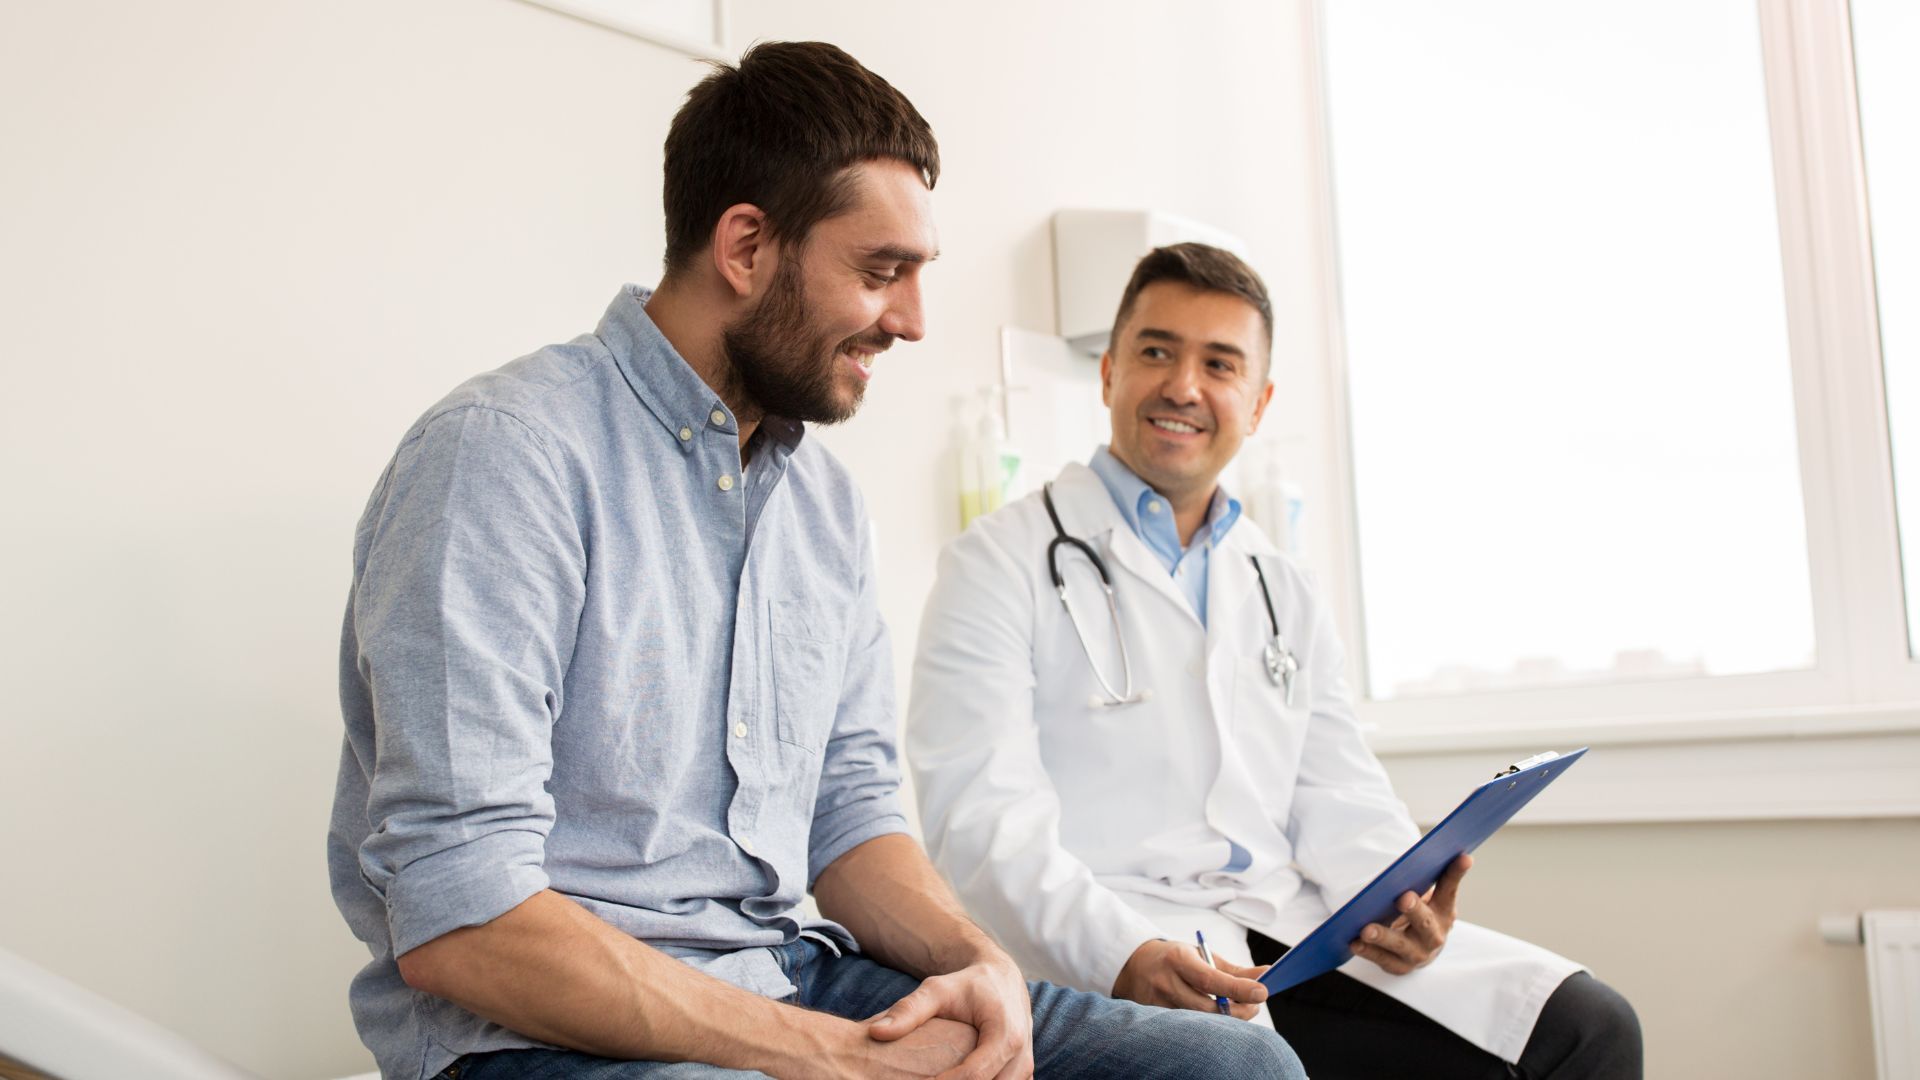 Male patient and doctor sitting down in doctor surgery having a conversation and smiling